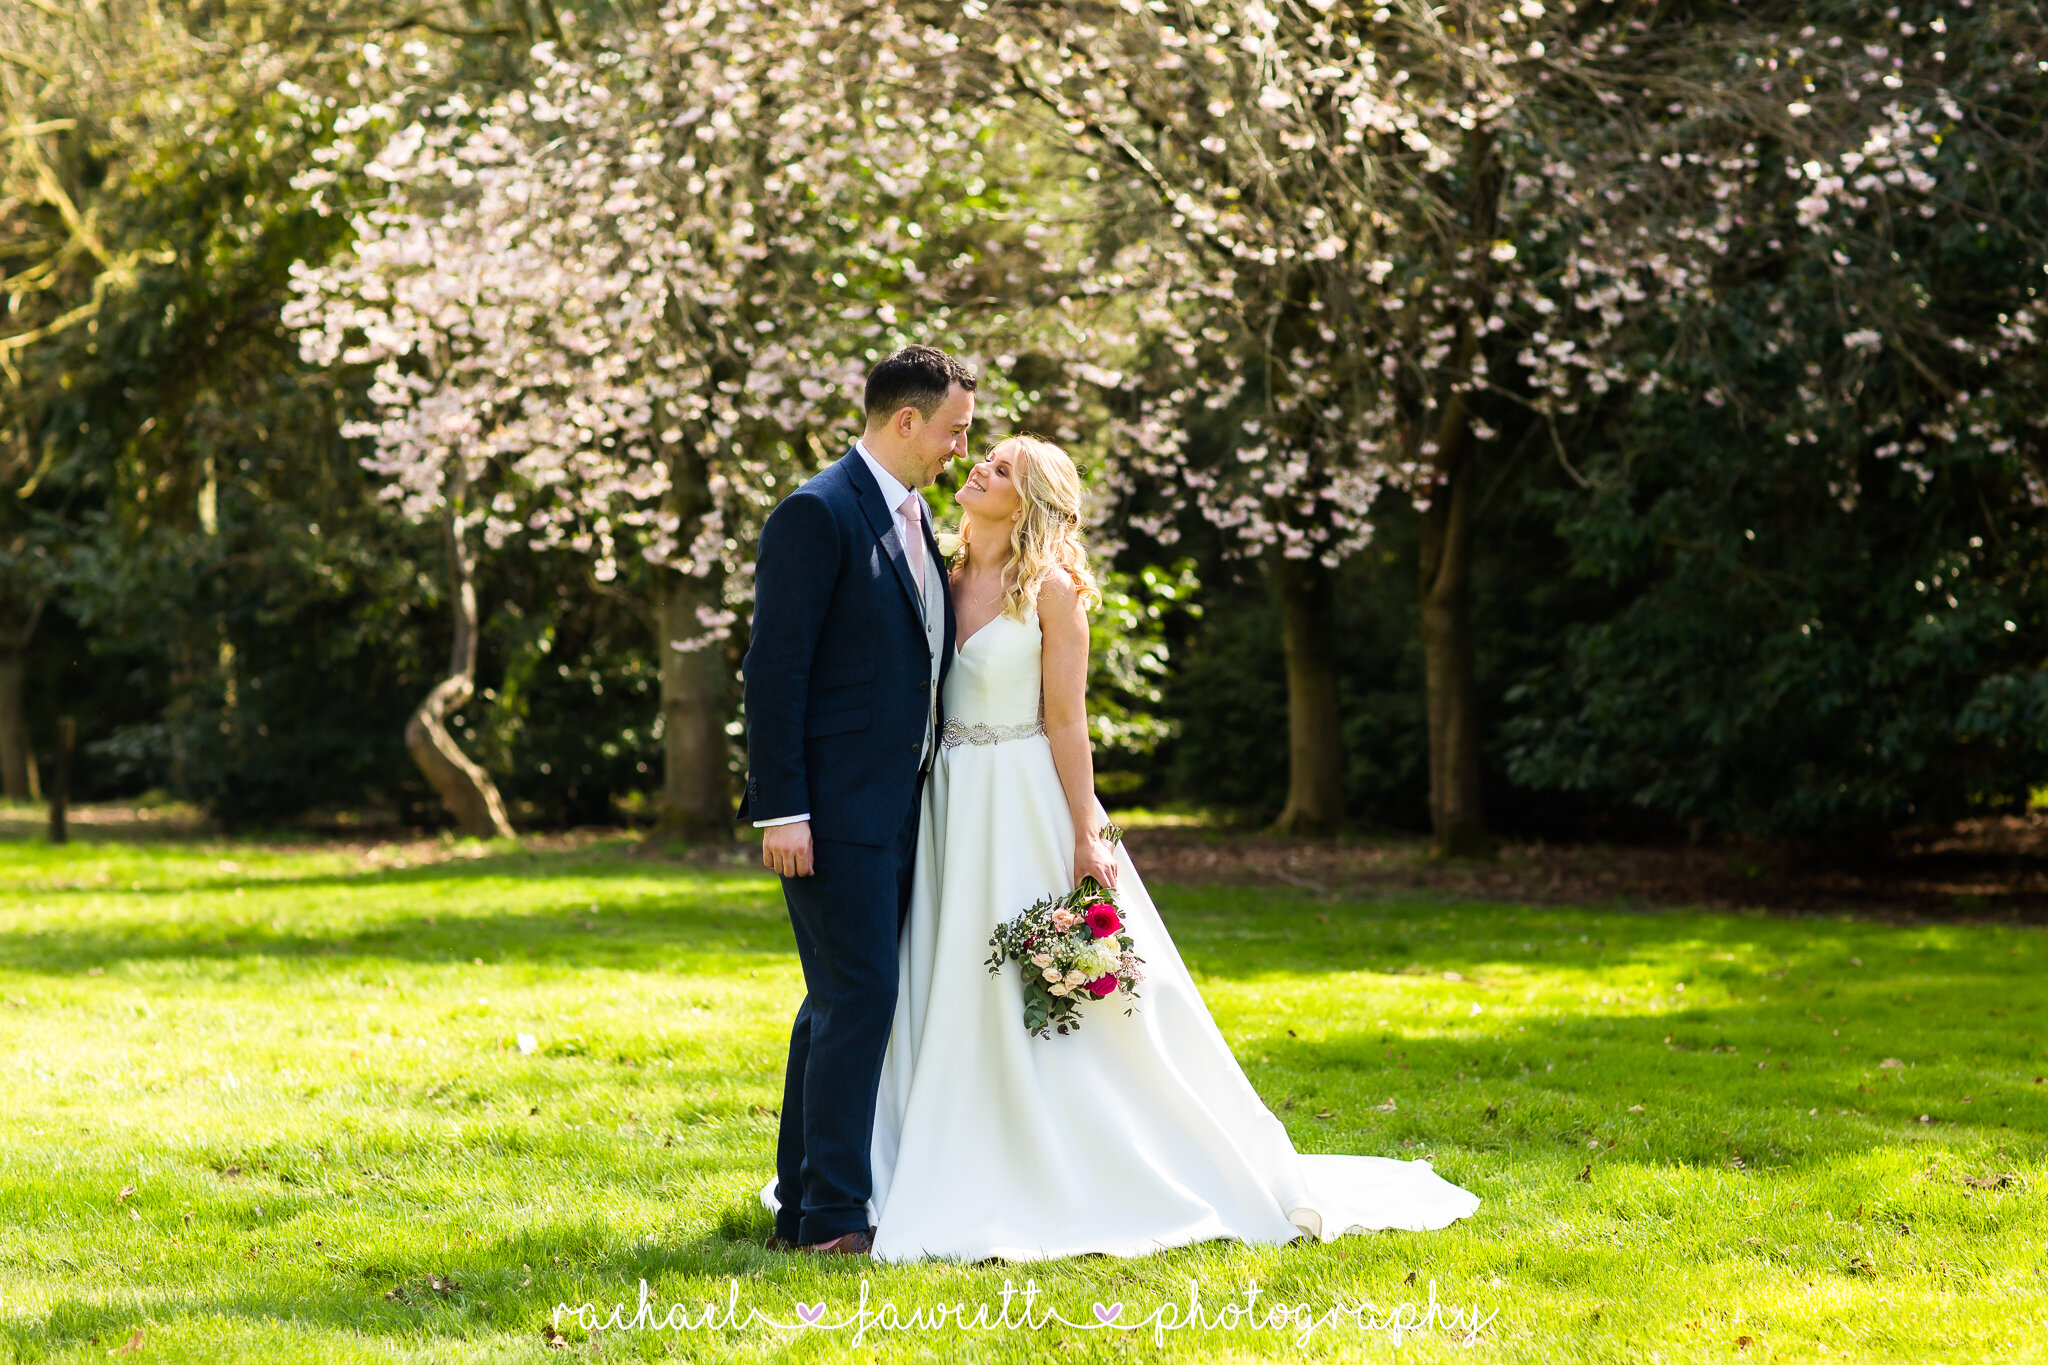 ❤ MR &amp; MRS ORTON ❤

Yesterday, I had the pleasure of photographing the wedding of my beautiful friend, Laura, and her lovely husband Tom. We waited 3 years to finally get to this day and it was even more perfect that any of us could have dreamed 